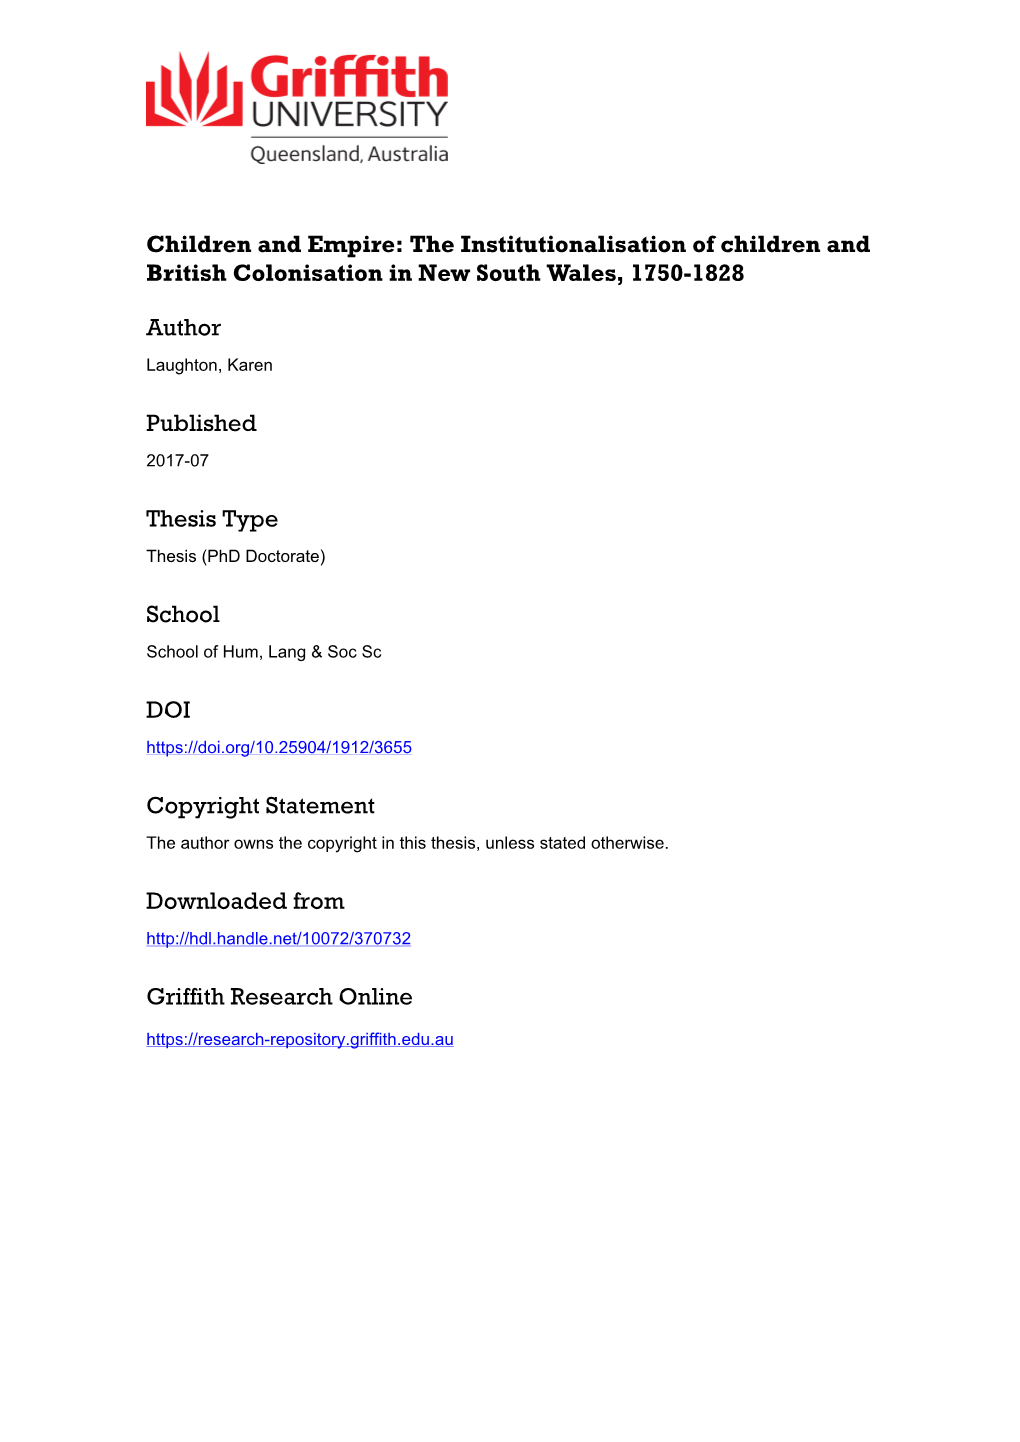 The Institutionalisation of Children and British Colonisation in New South Wales, 1750-1828